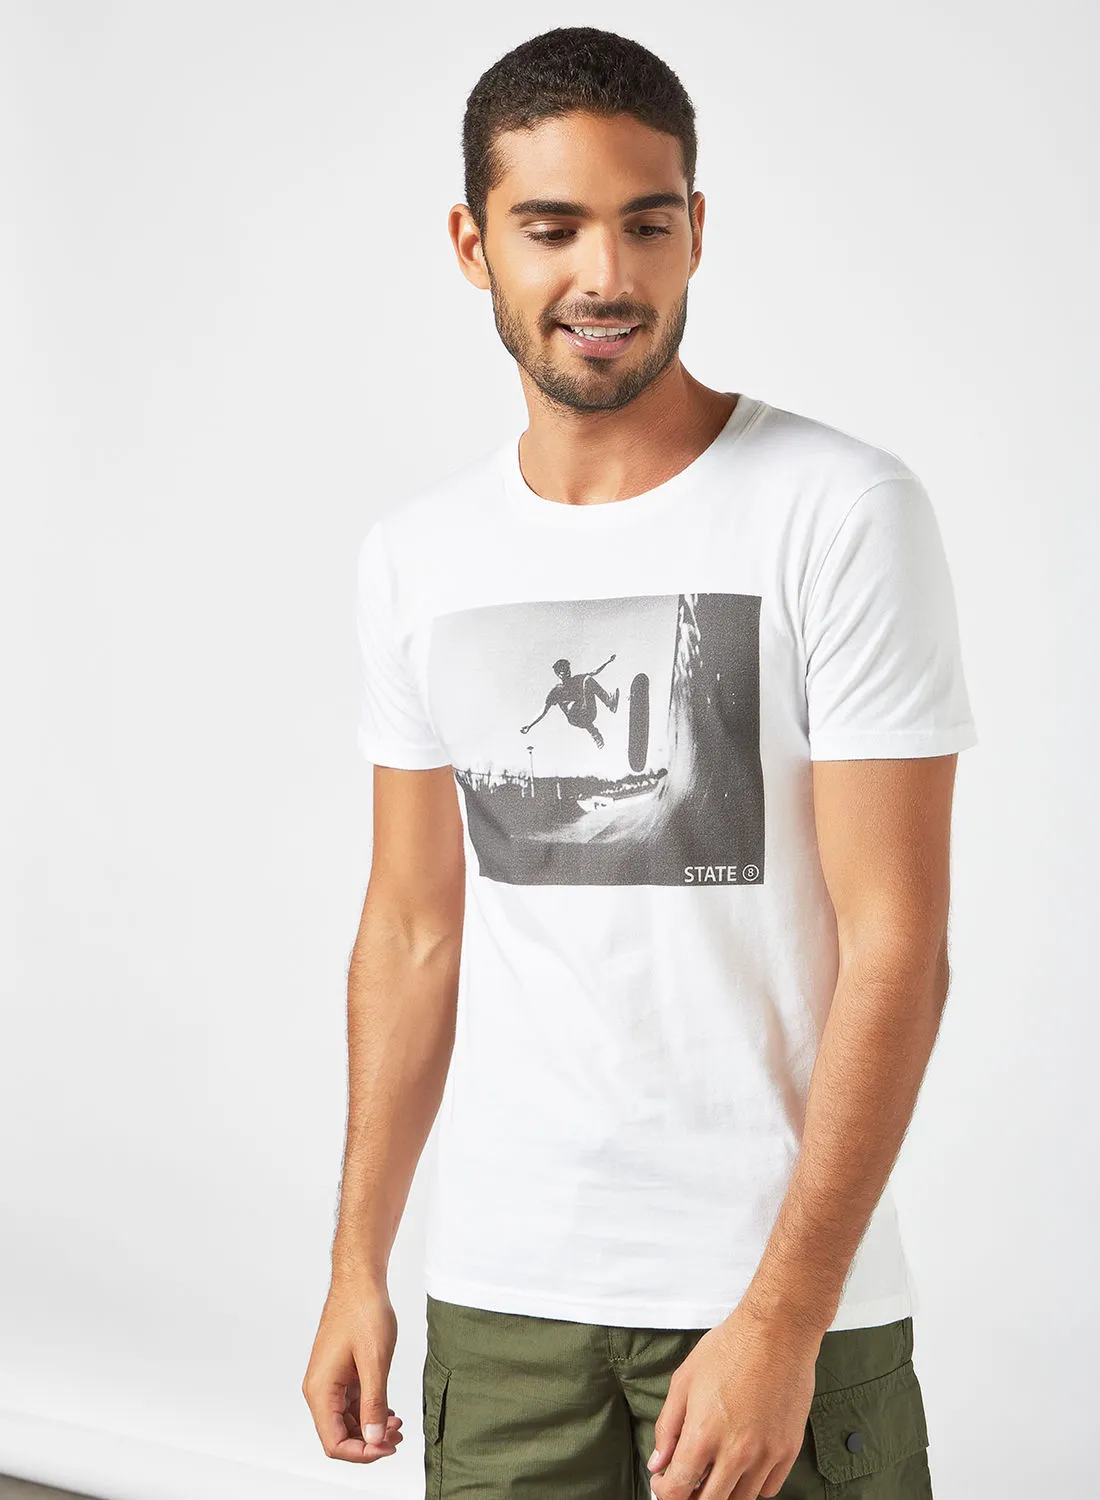 STATE 8 Surfing Graphic Print T-Shirt White